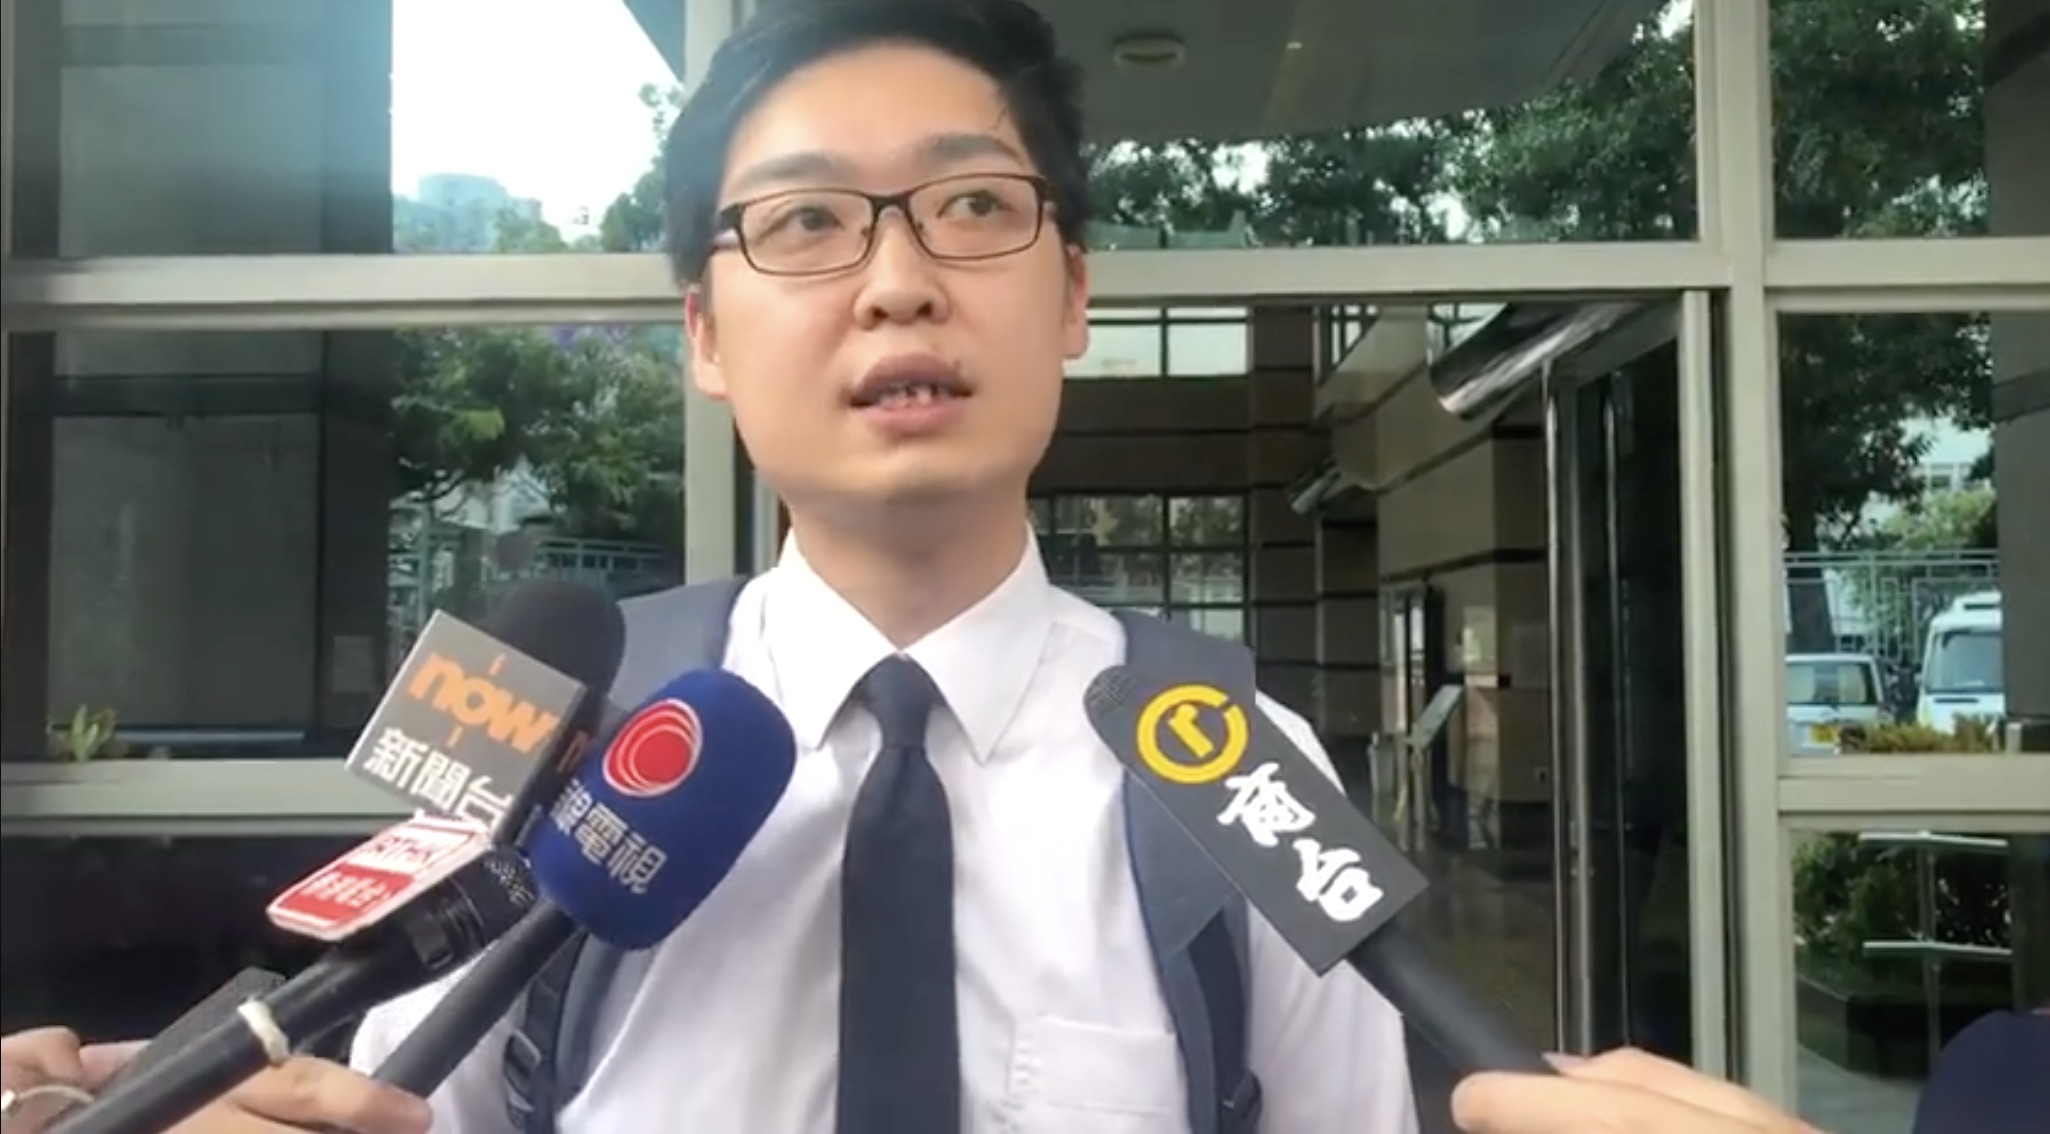 Andy Chan speaking to reporters outside Fanling magistrates’ Court. Screengrab via Facebook video/Stand News.